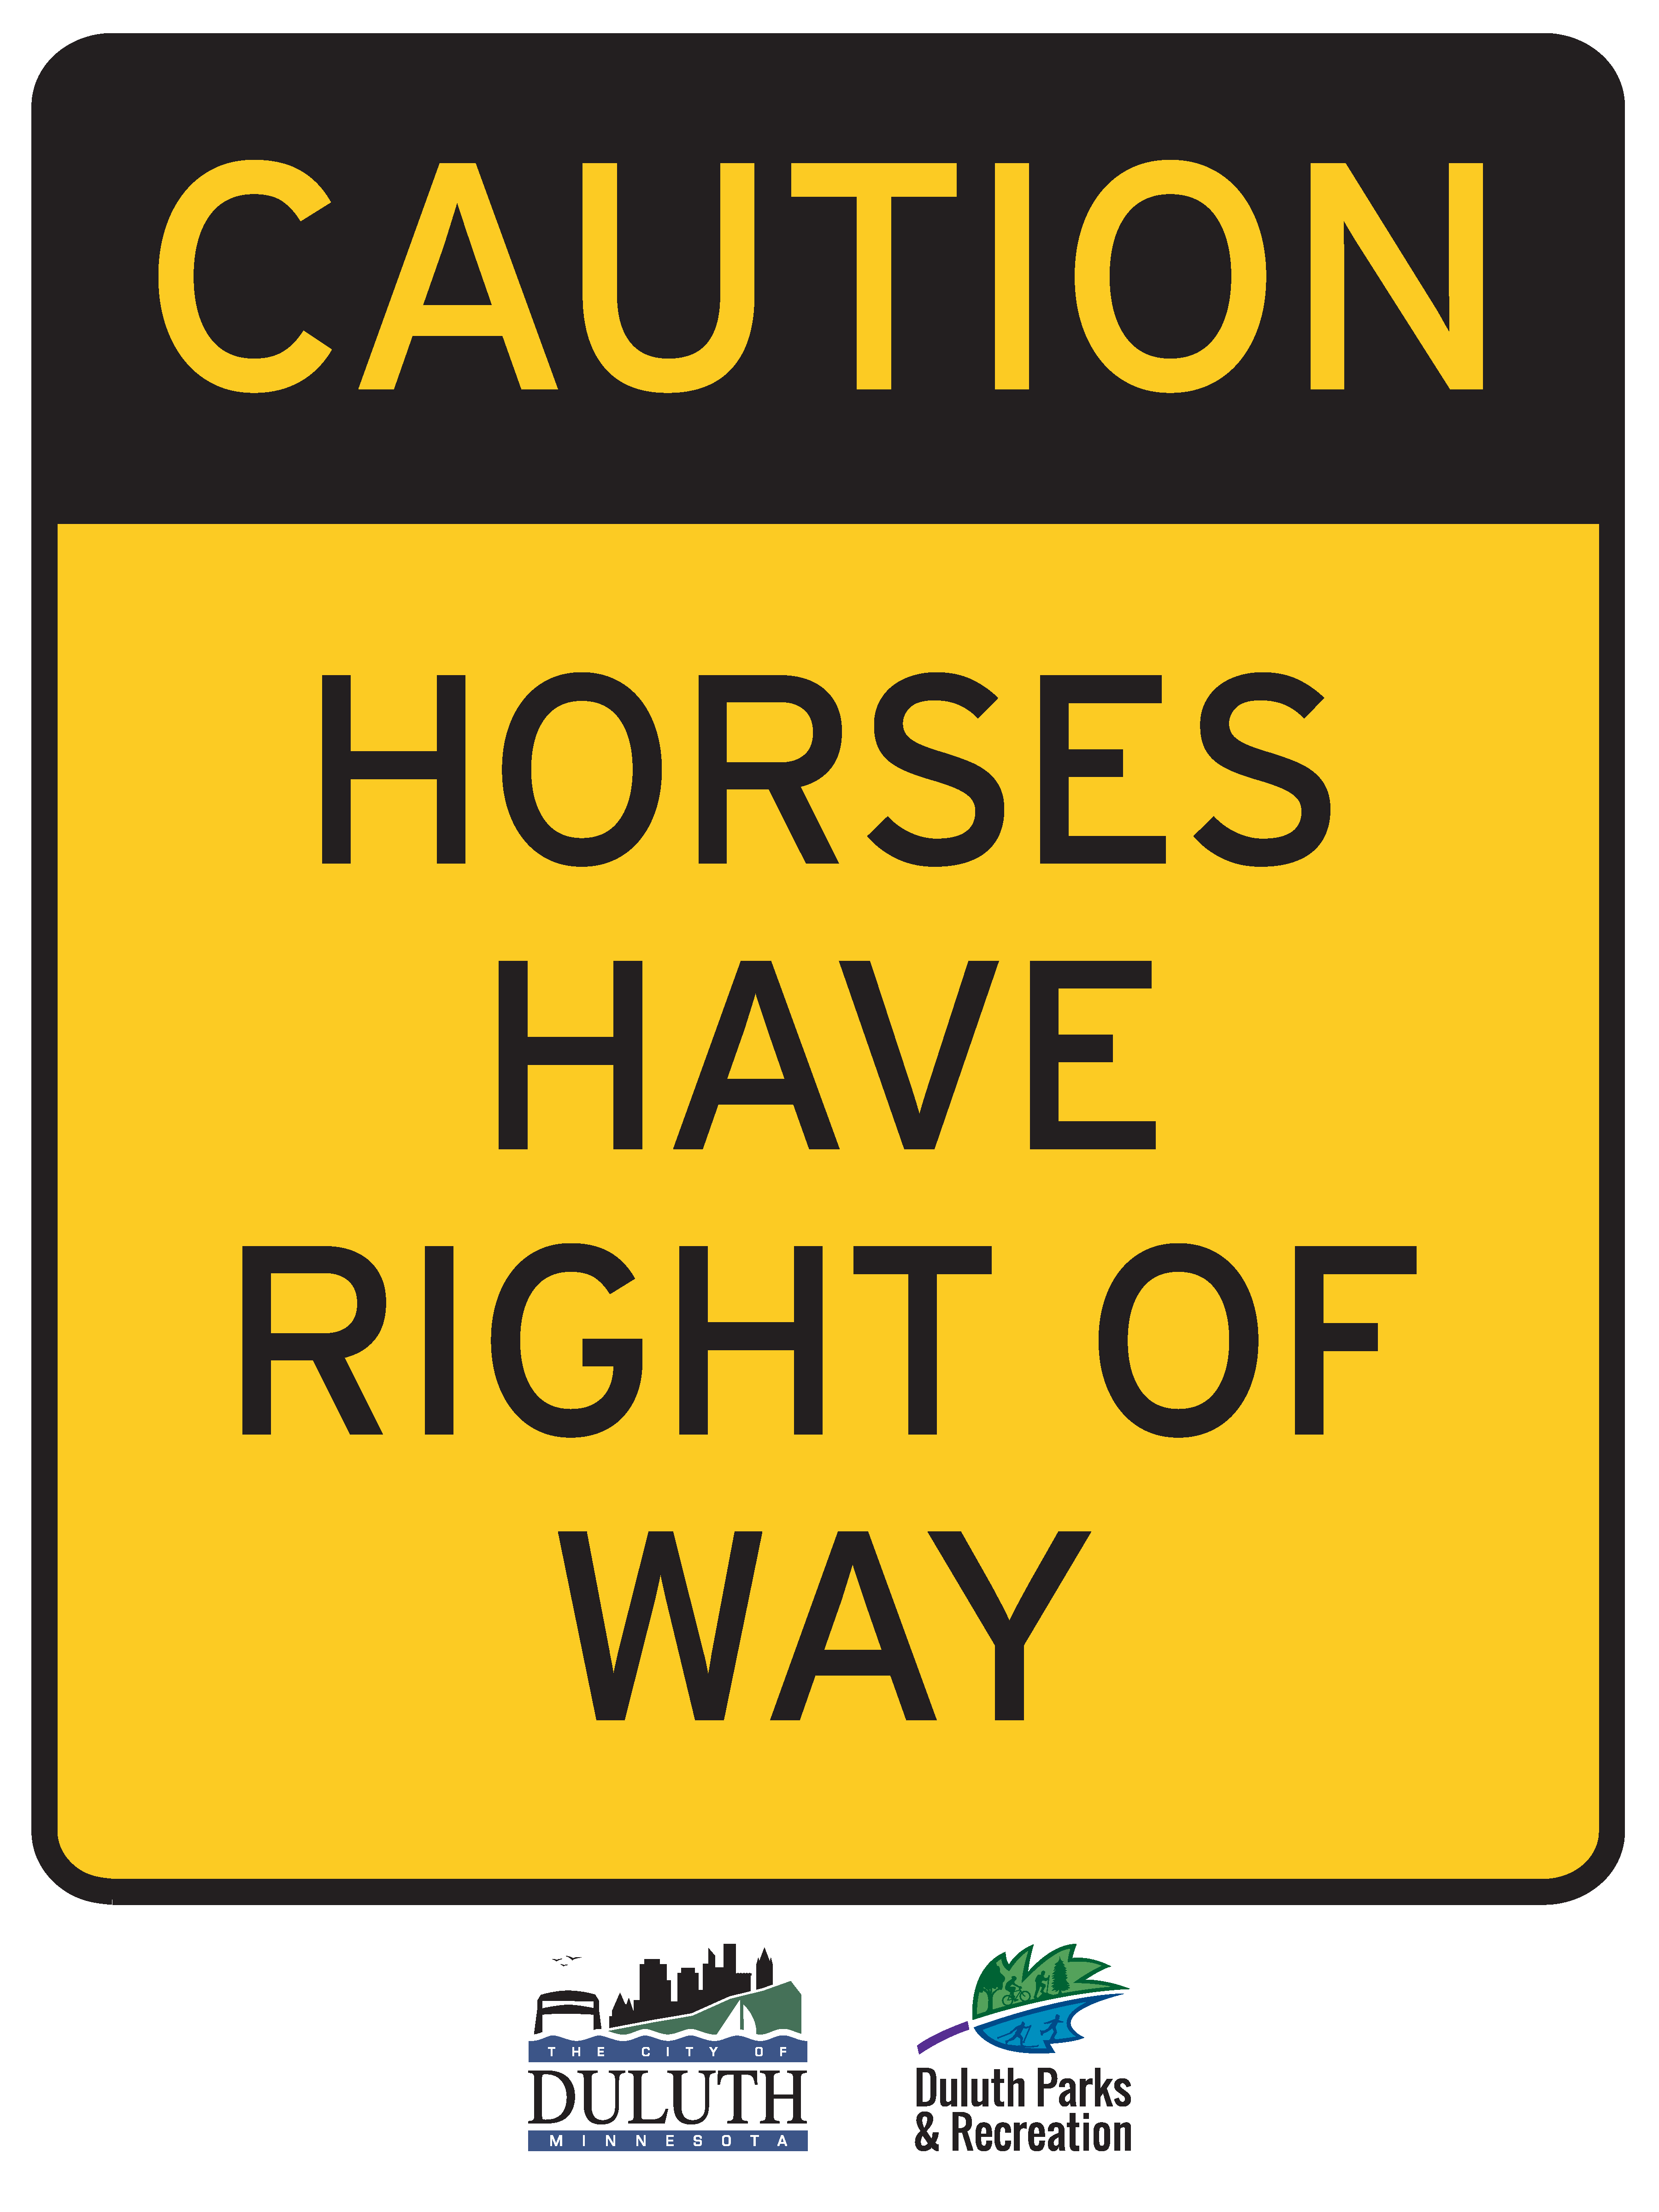 Horses have right of way